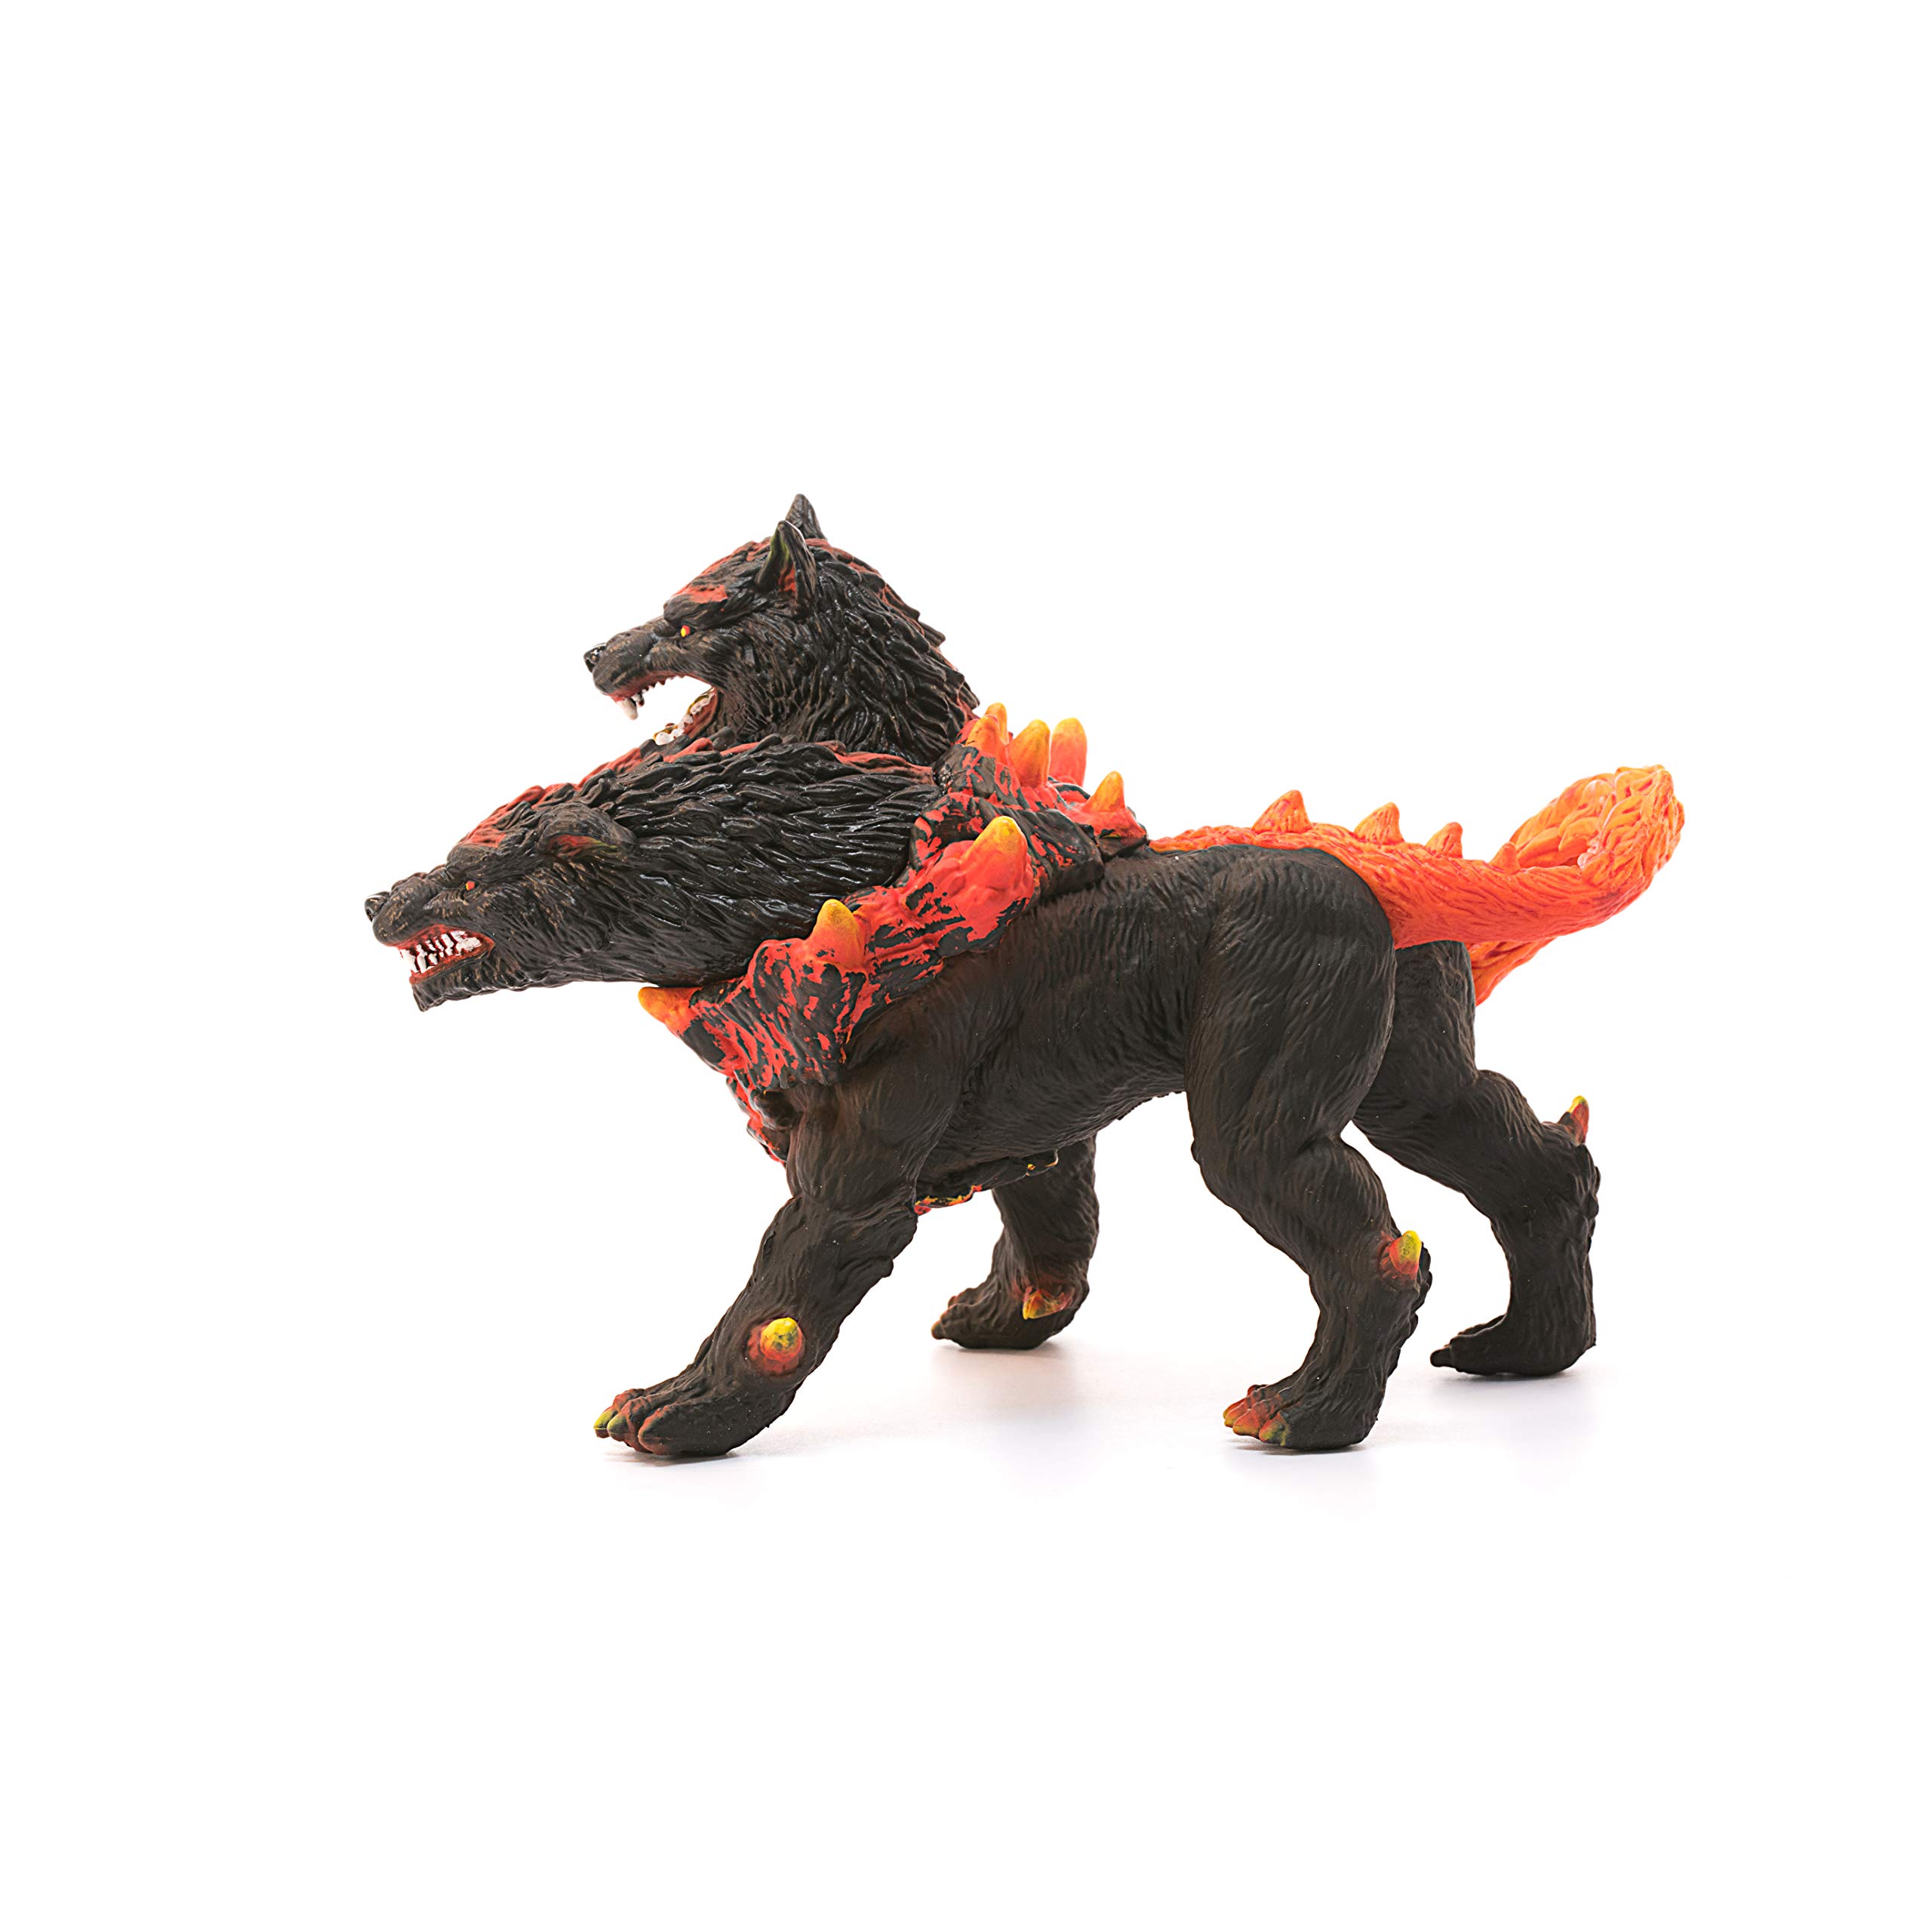 Schleich Eldrador Creatures, Lava Monster Mythical Creatures Toys for Kids, Hellhound Action Figure, Ages 7+